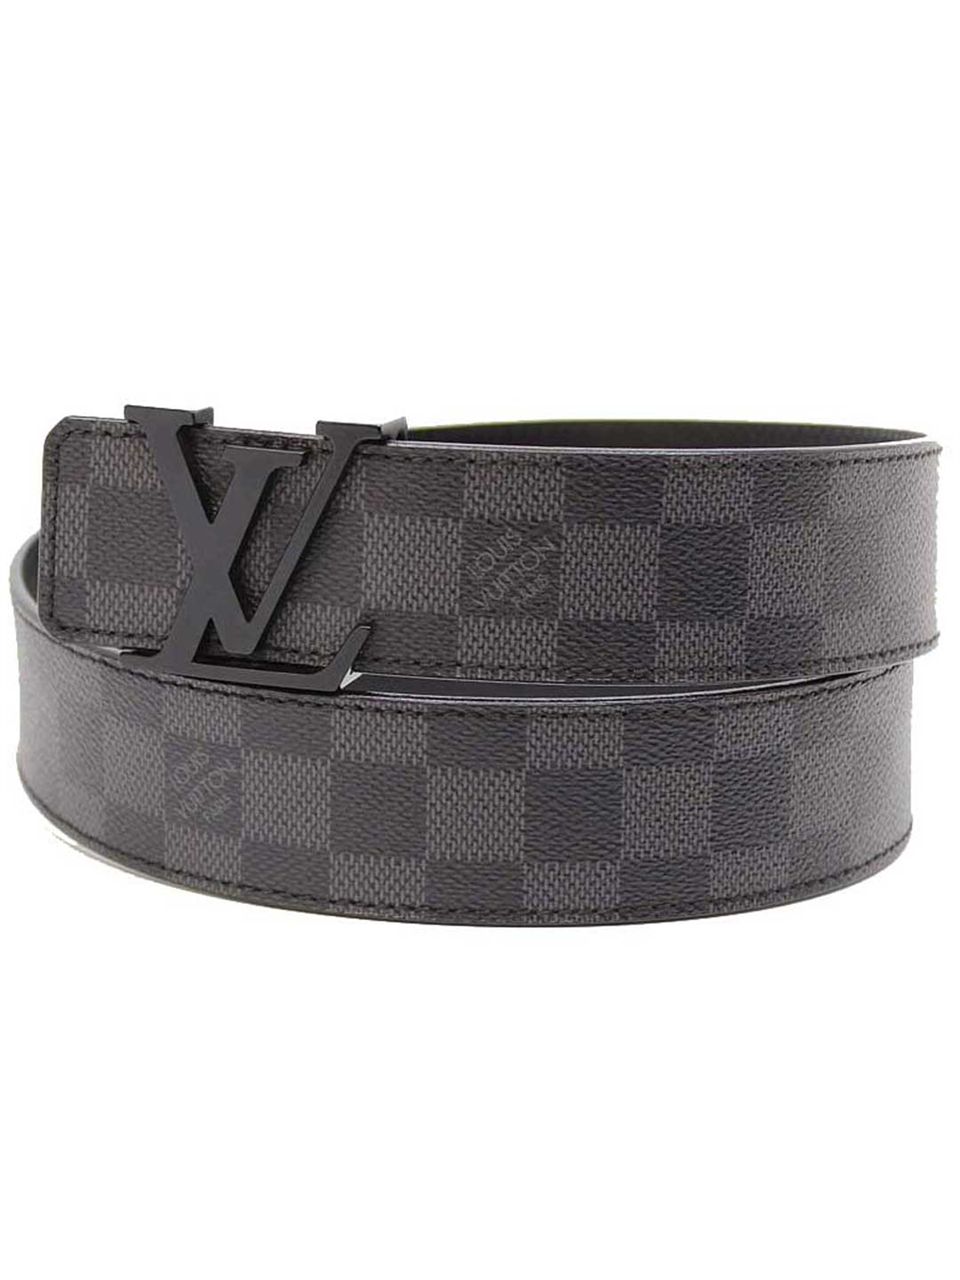 Louis Vuitton Belt For Sale In Durban | Confederated Tribes of the Umatilla Indian Reservation